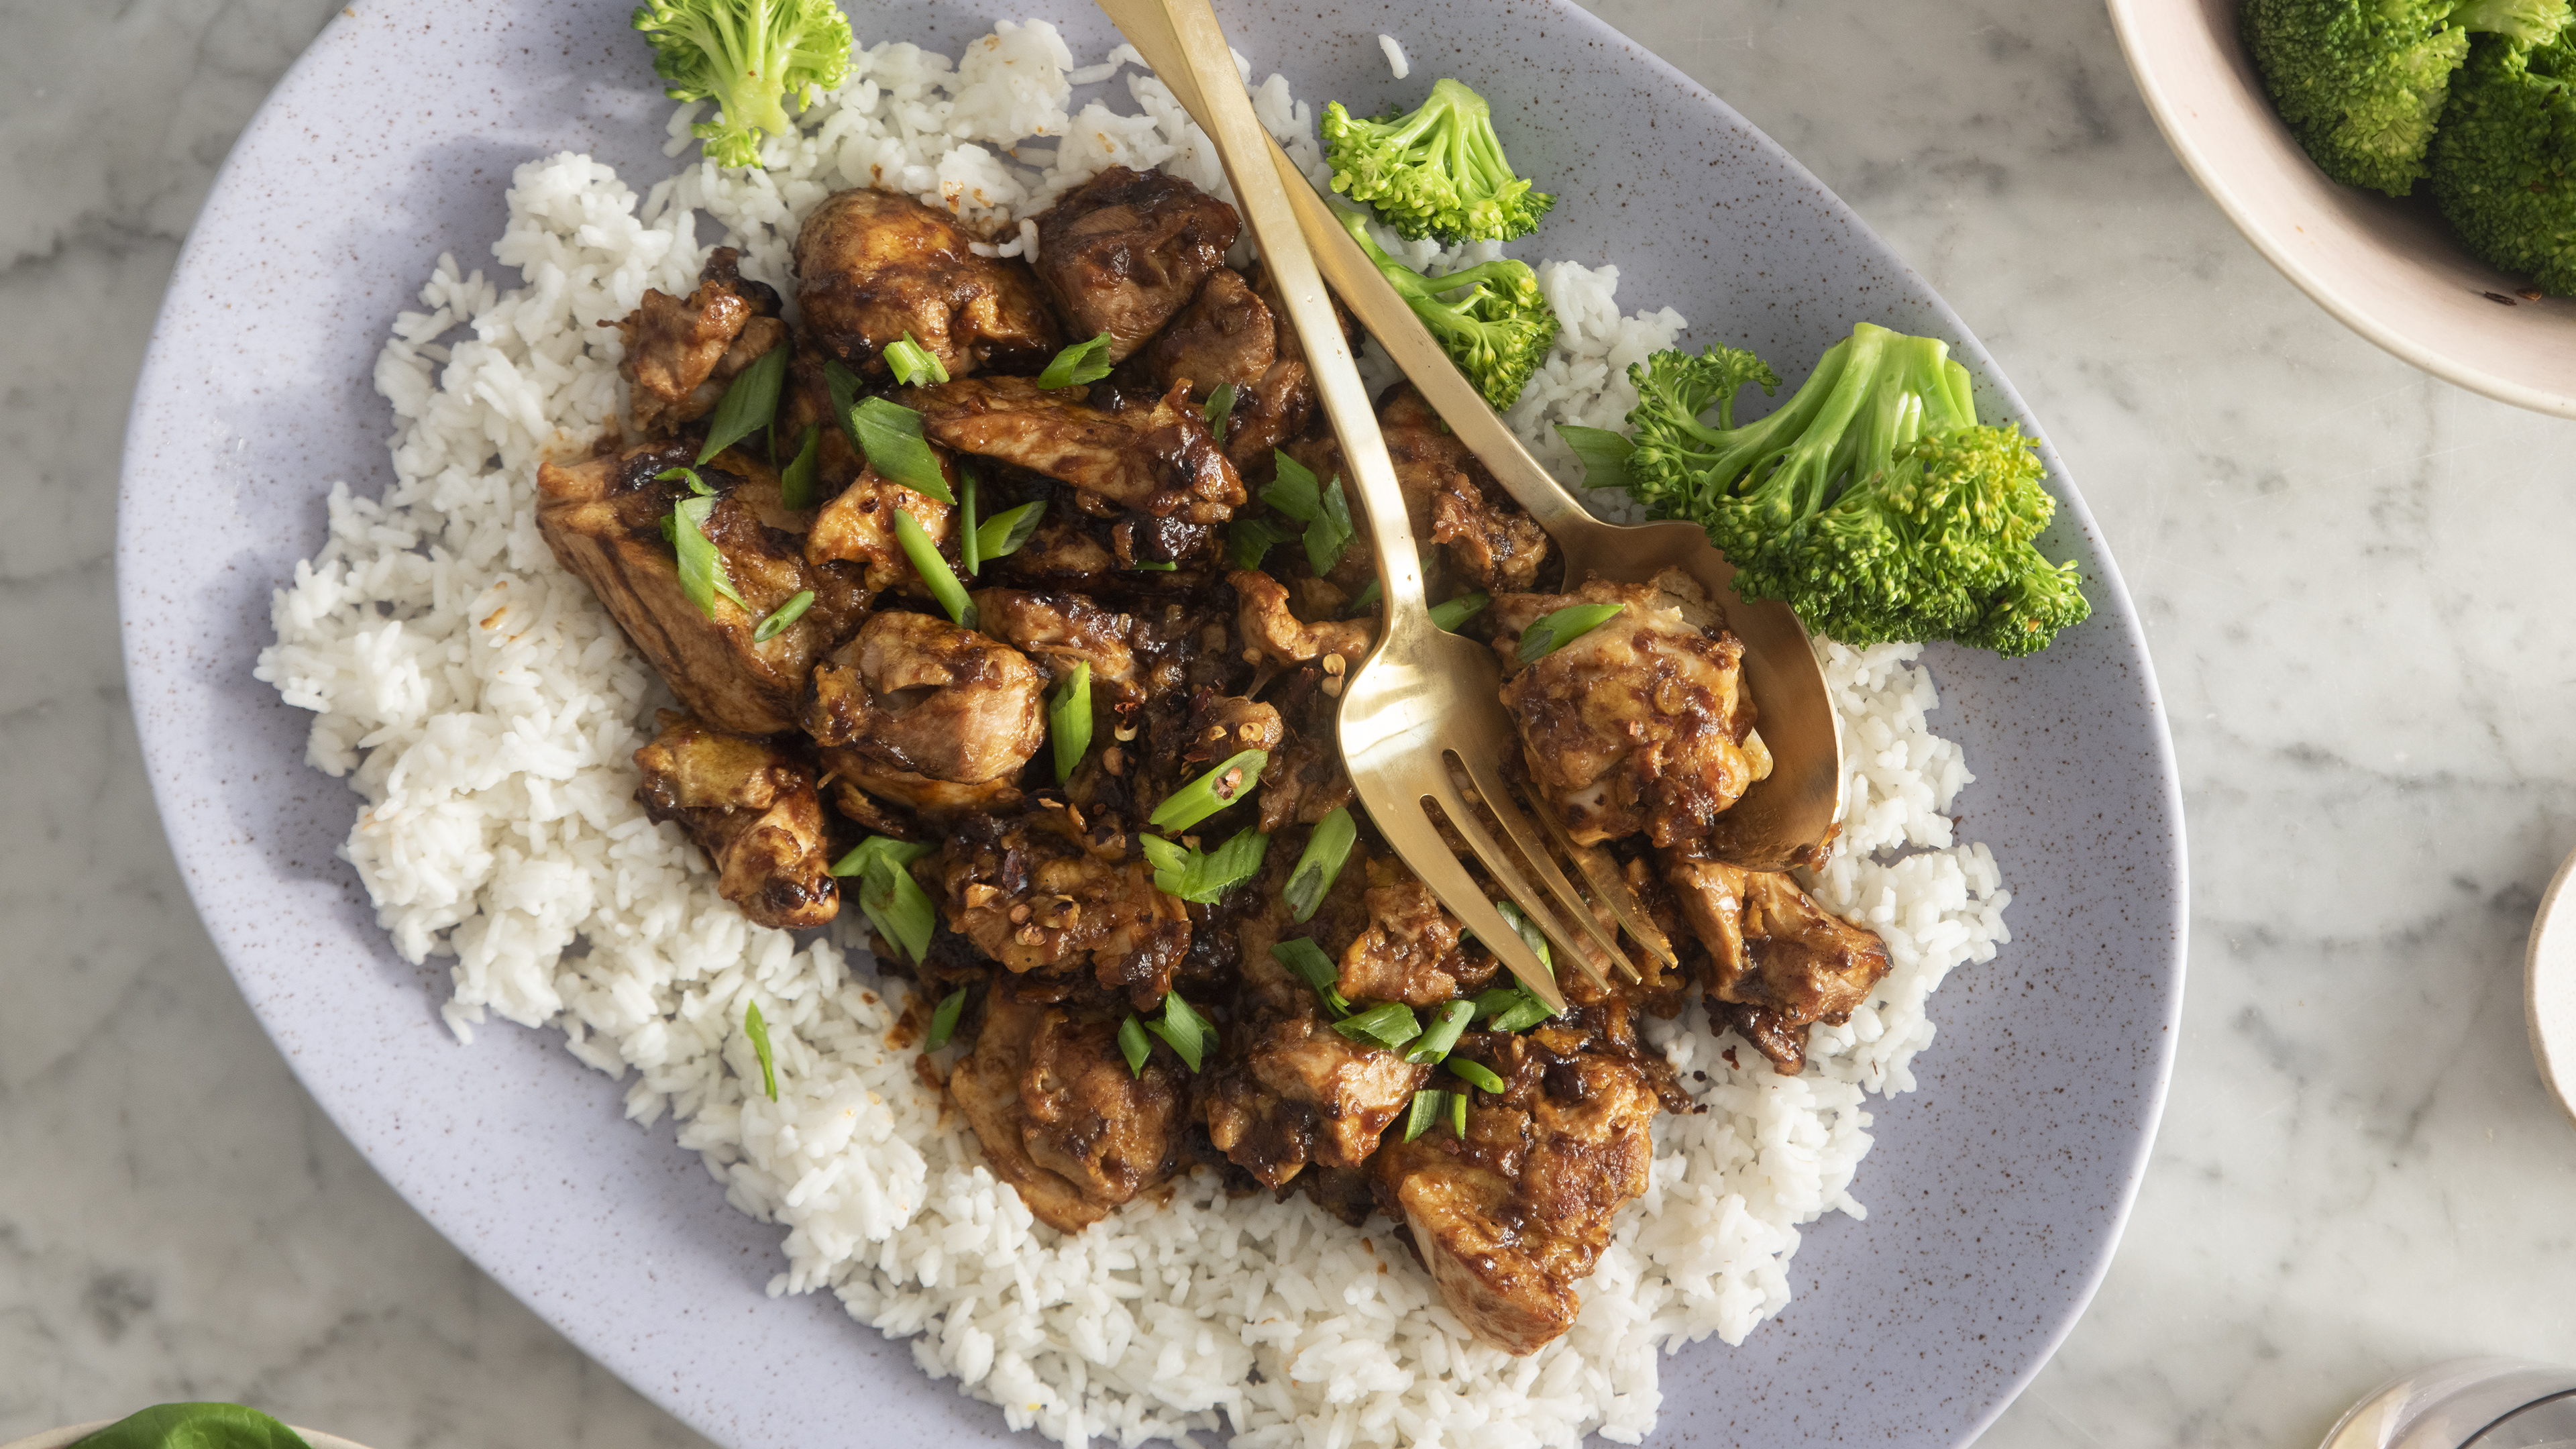 ❧ How To Make MEAN GUY'S GENERAL TSO'S CHICKEN